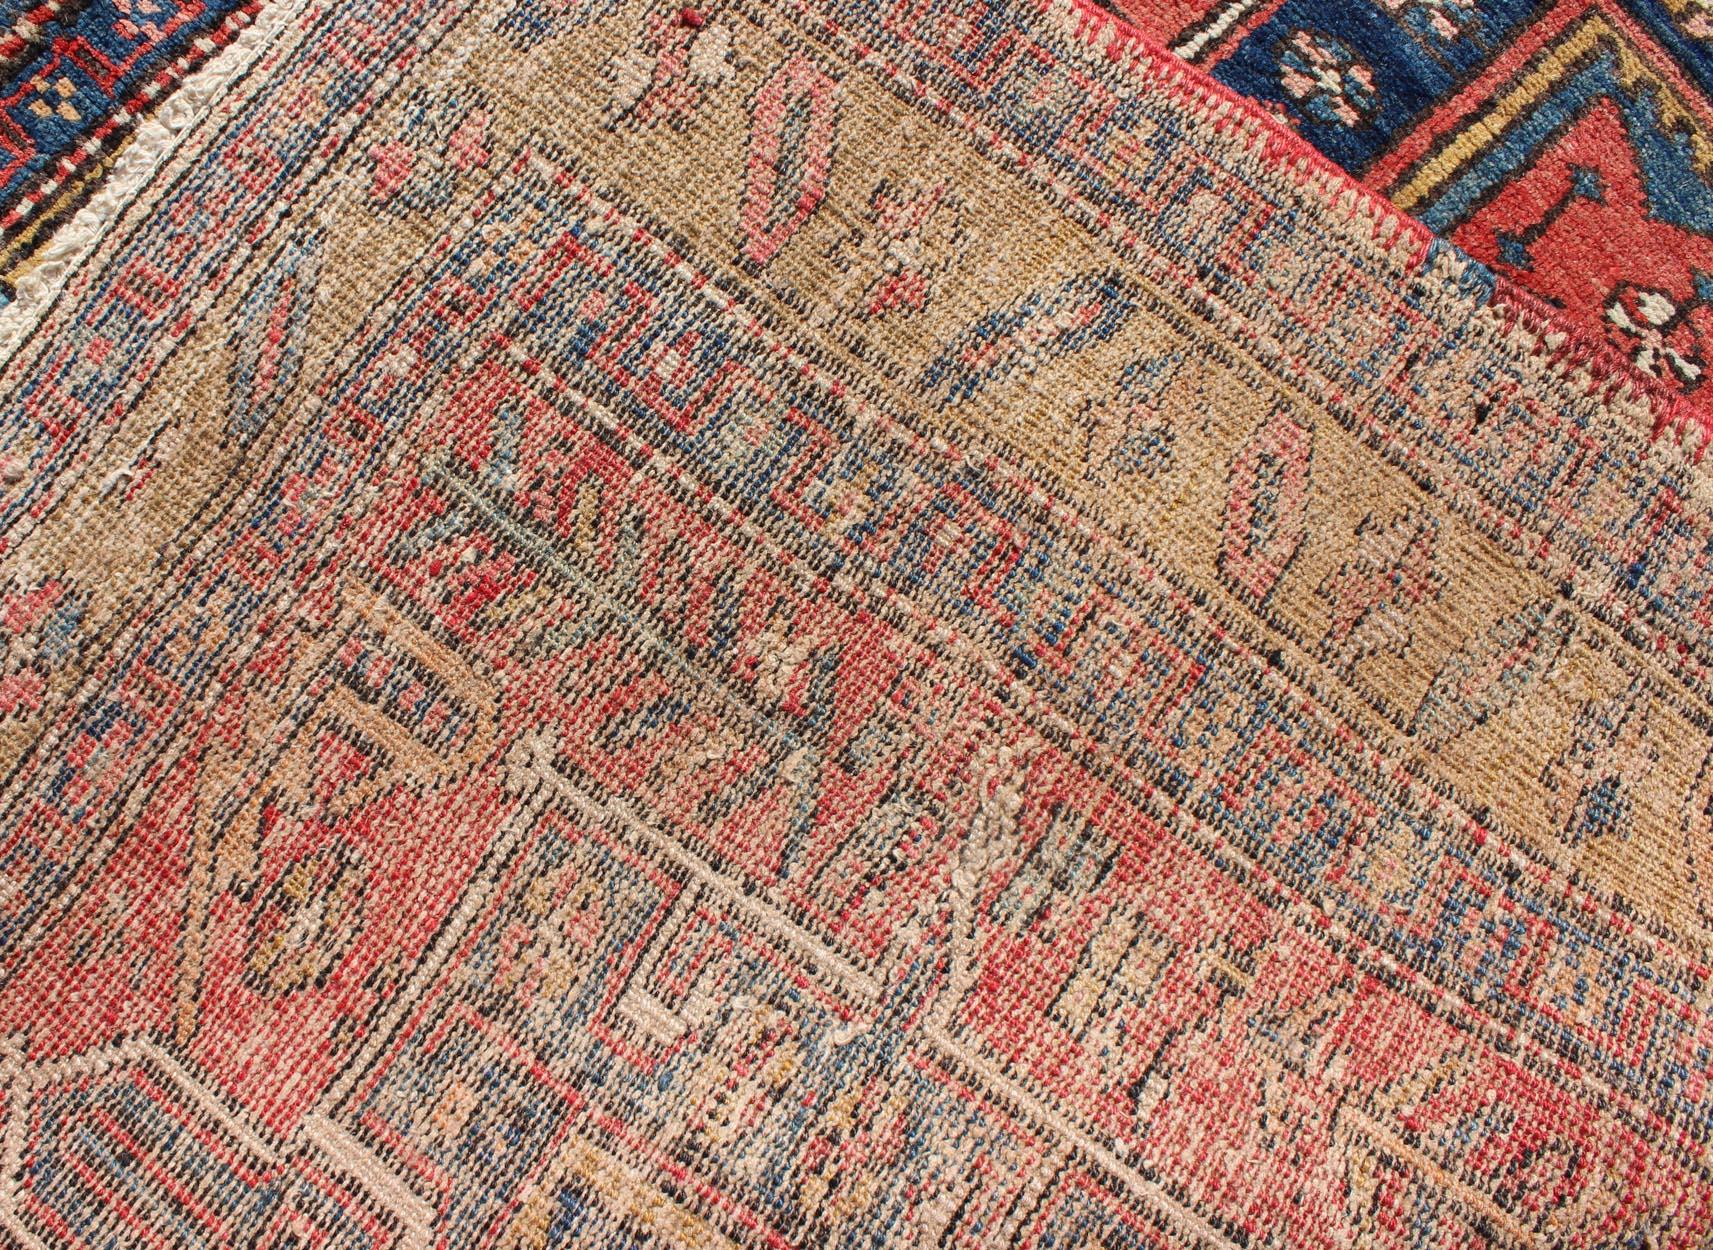 Wool Persian Heriz Semi Antique Runner in Soft Red, Blue and Yellow Colors